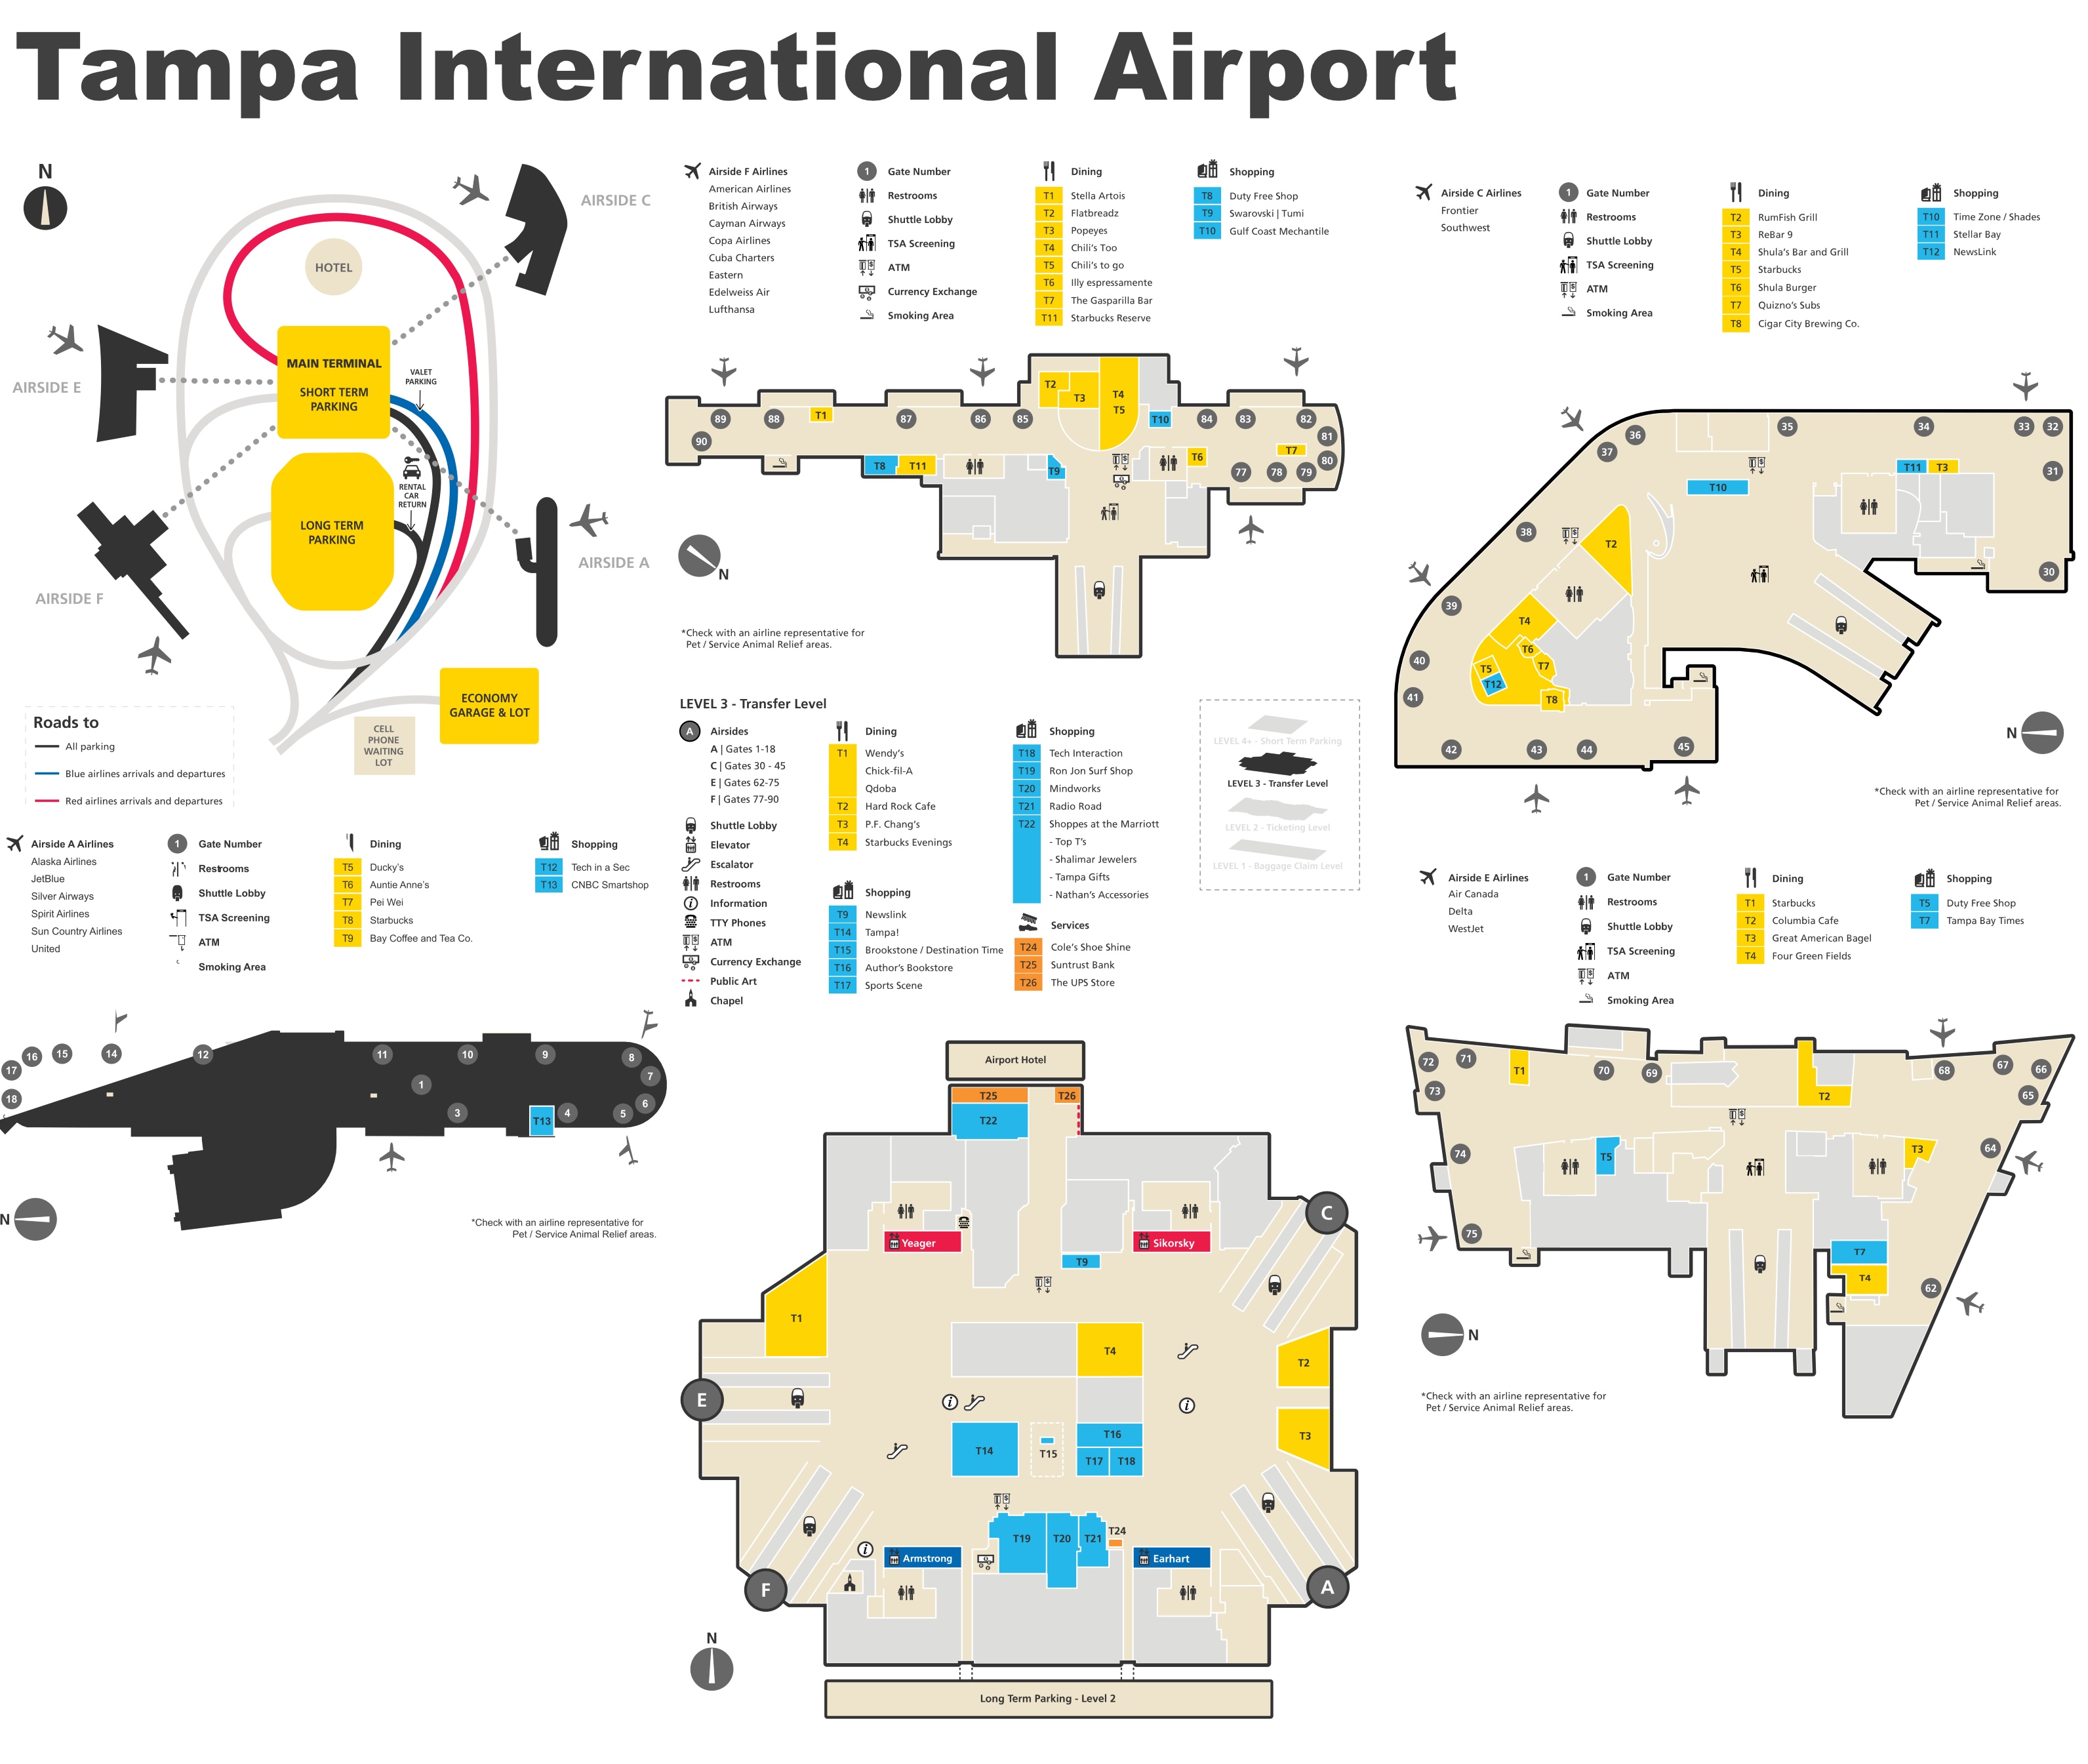 33 Map Of Tampa International Airport - Maps Database Source